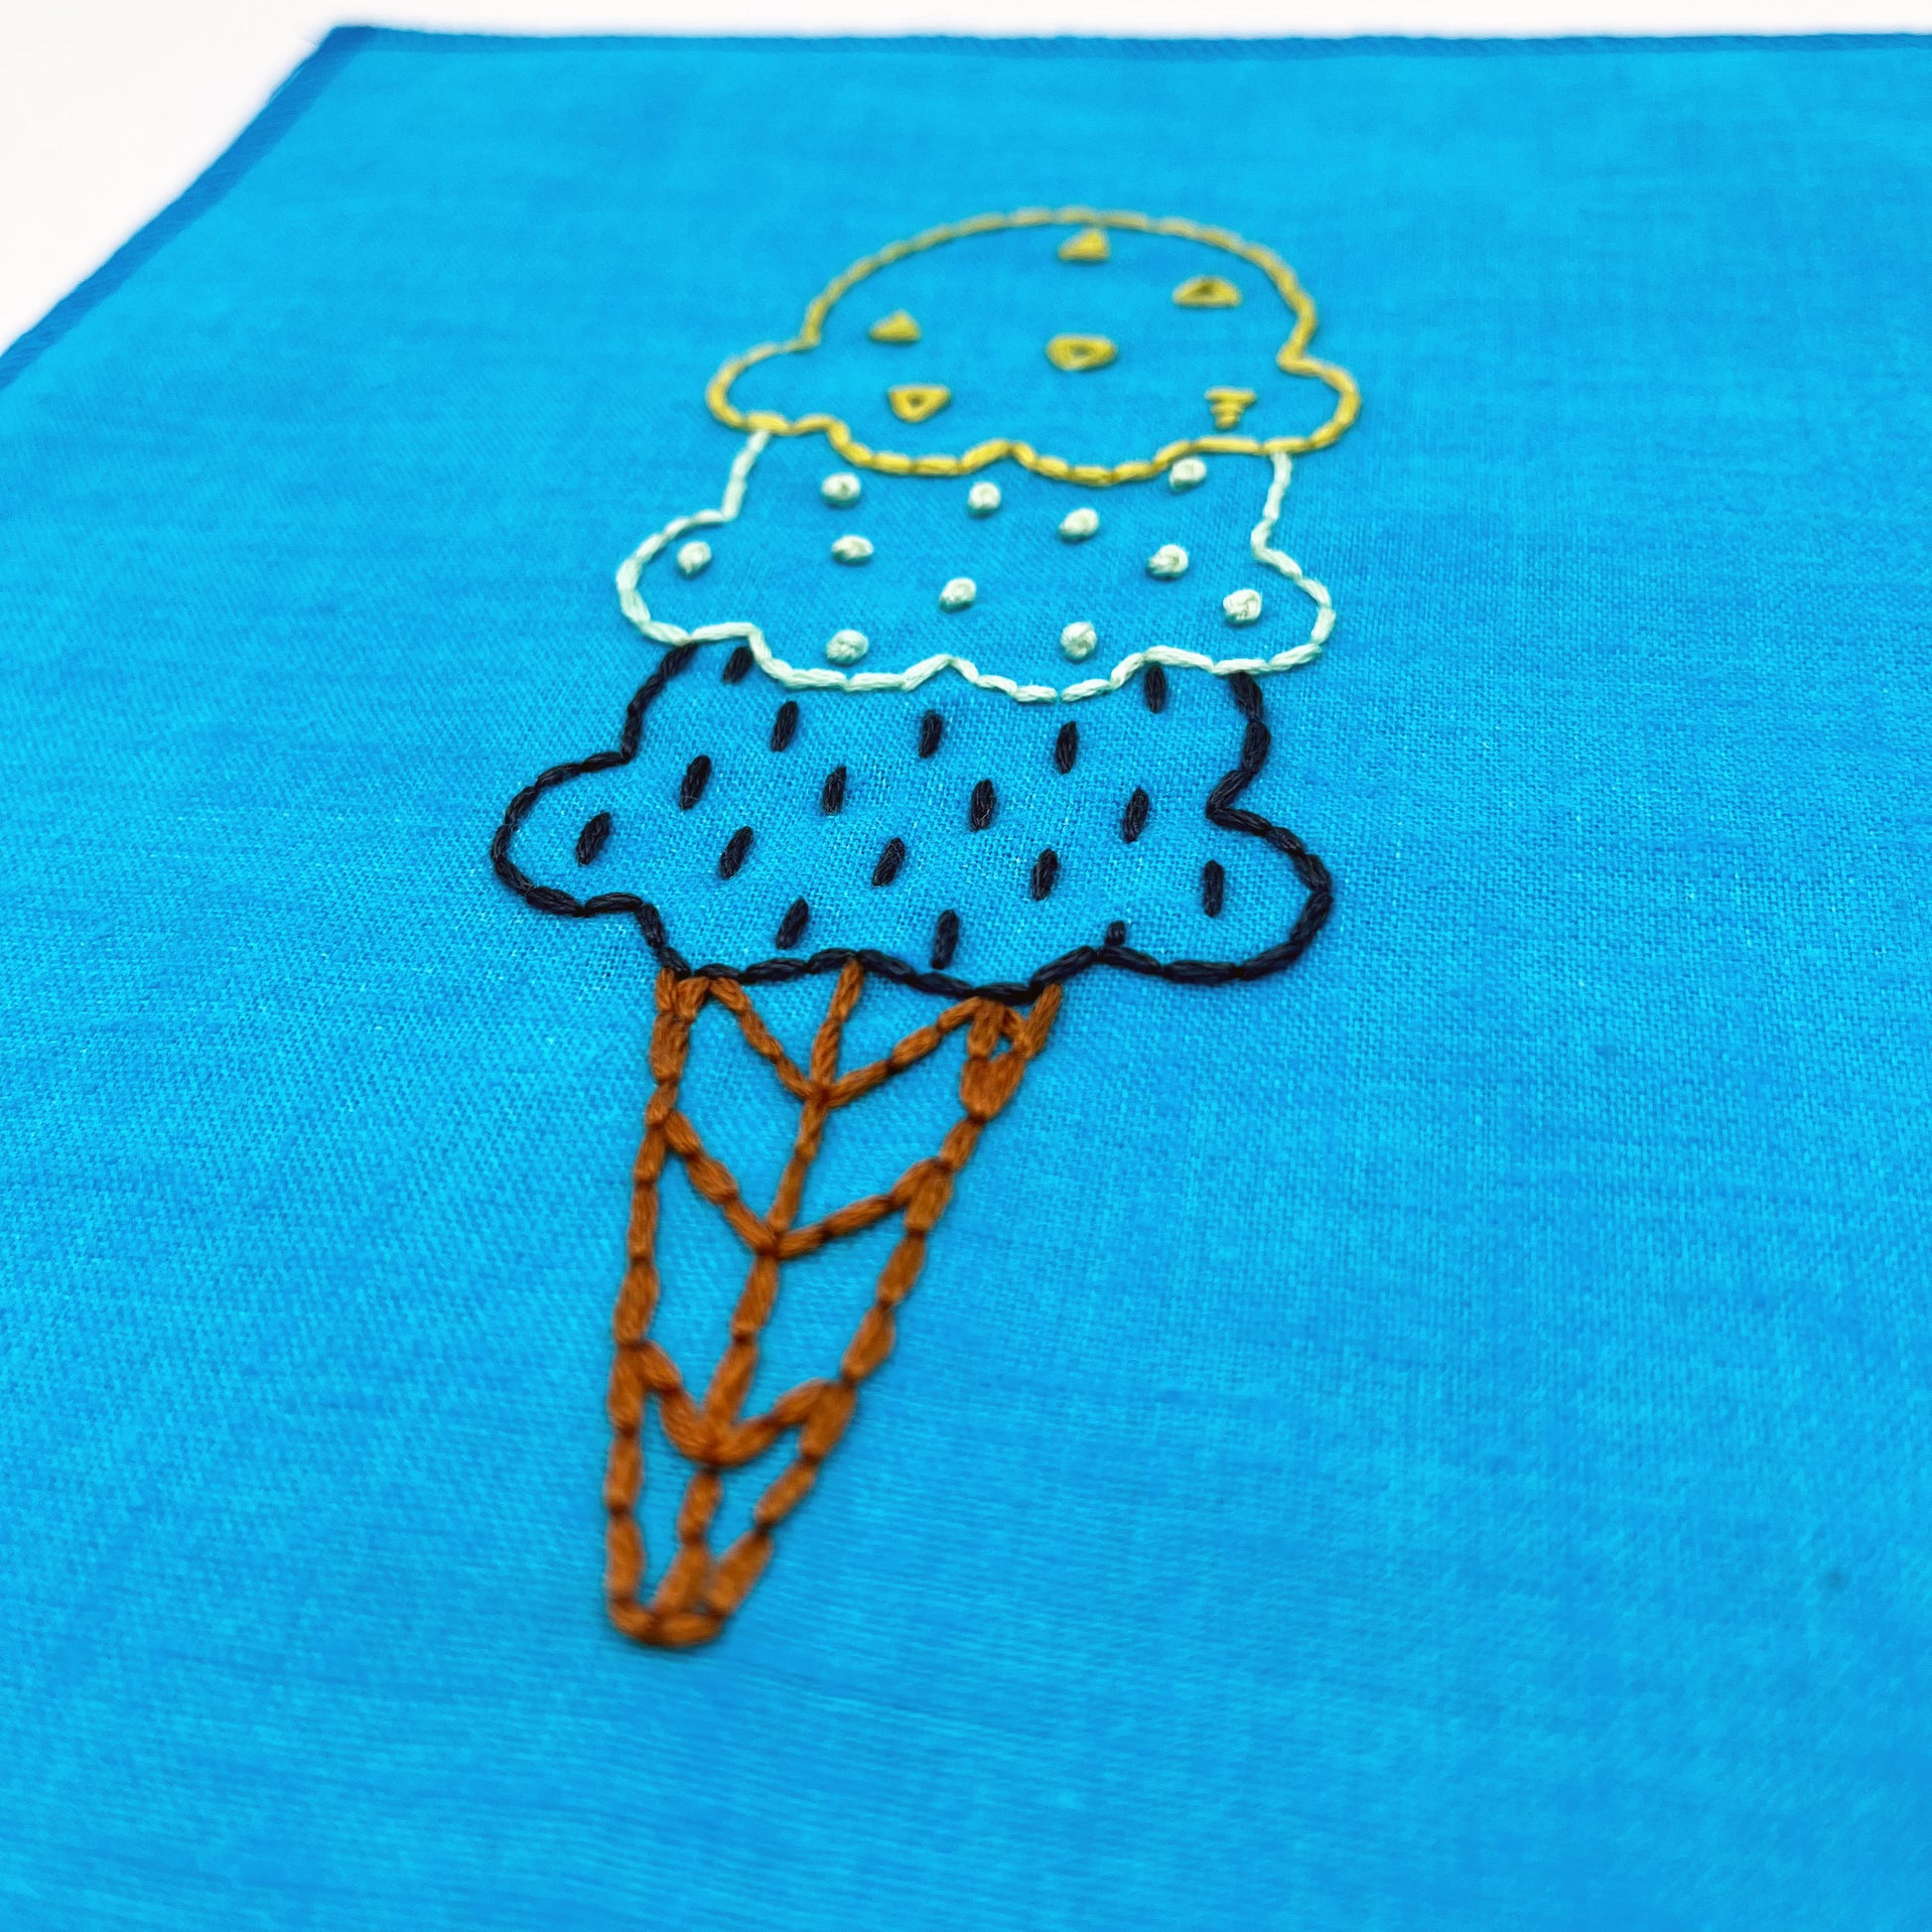 close up angled view ofa small bright blue fabric wall hanging, hand embroidered with with scoops of ice cream on a cone, the top scoop outlined and filled with yellow triangles, the middle mint green french dots, and the bottom dark blue dashes